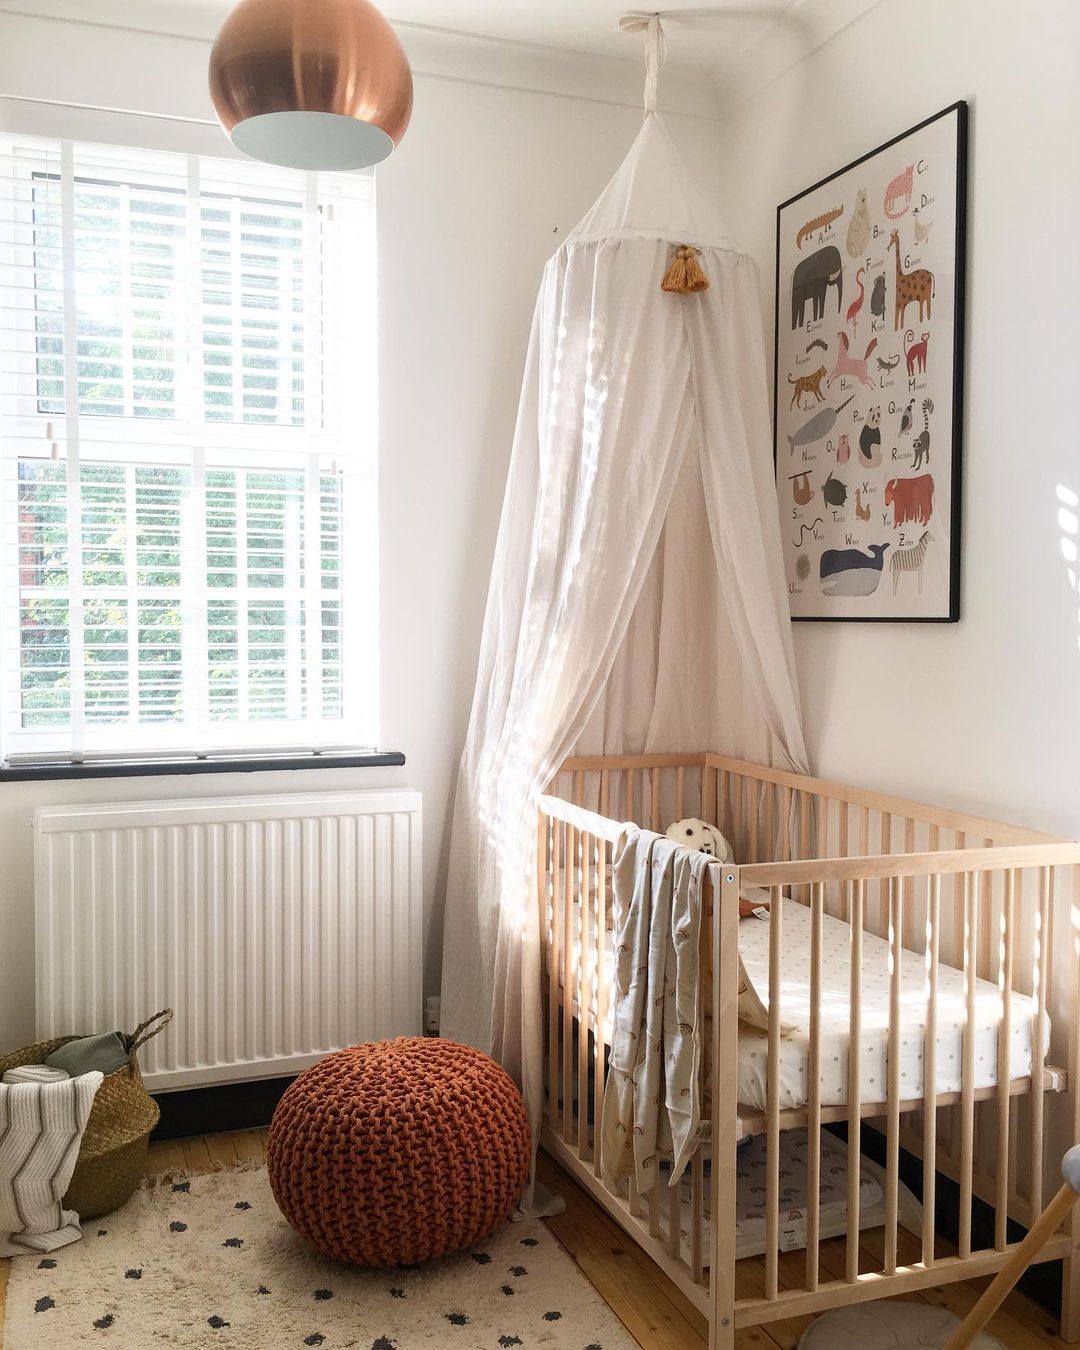 Crib with minimal bedding and white canopy. Photo by Instagram user @down_and_decor